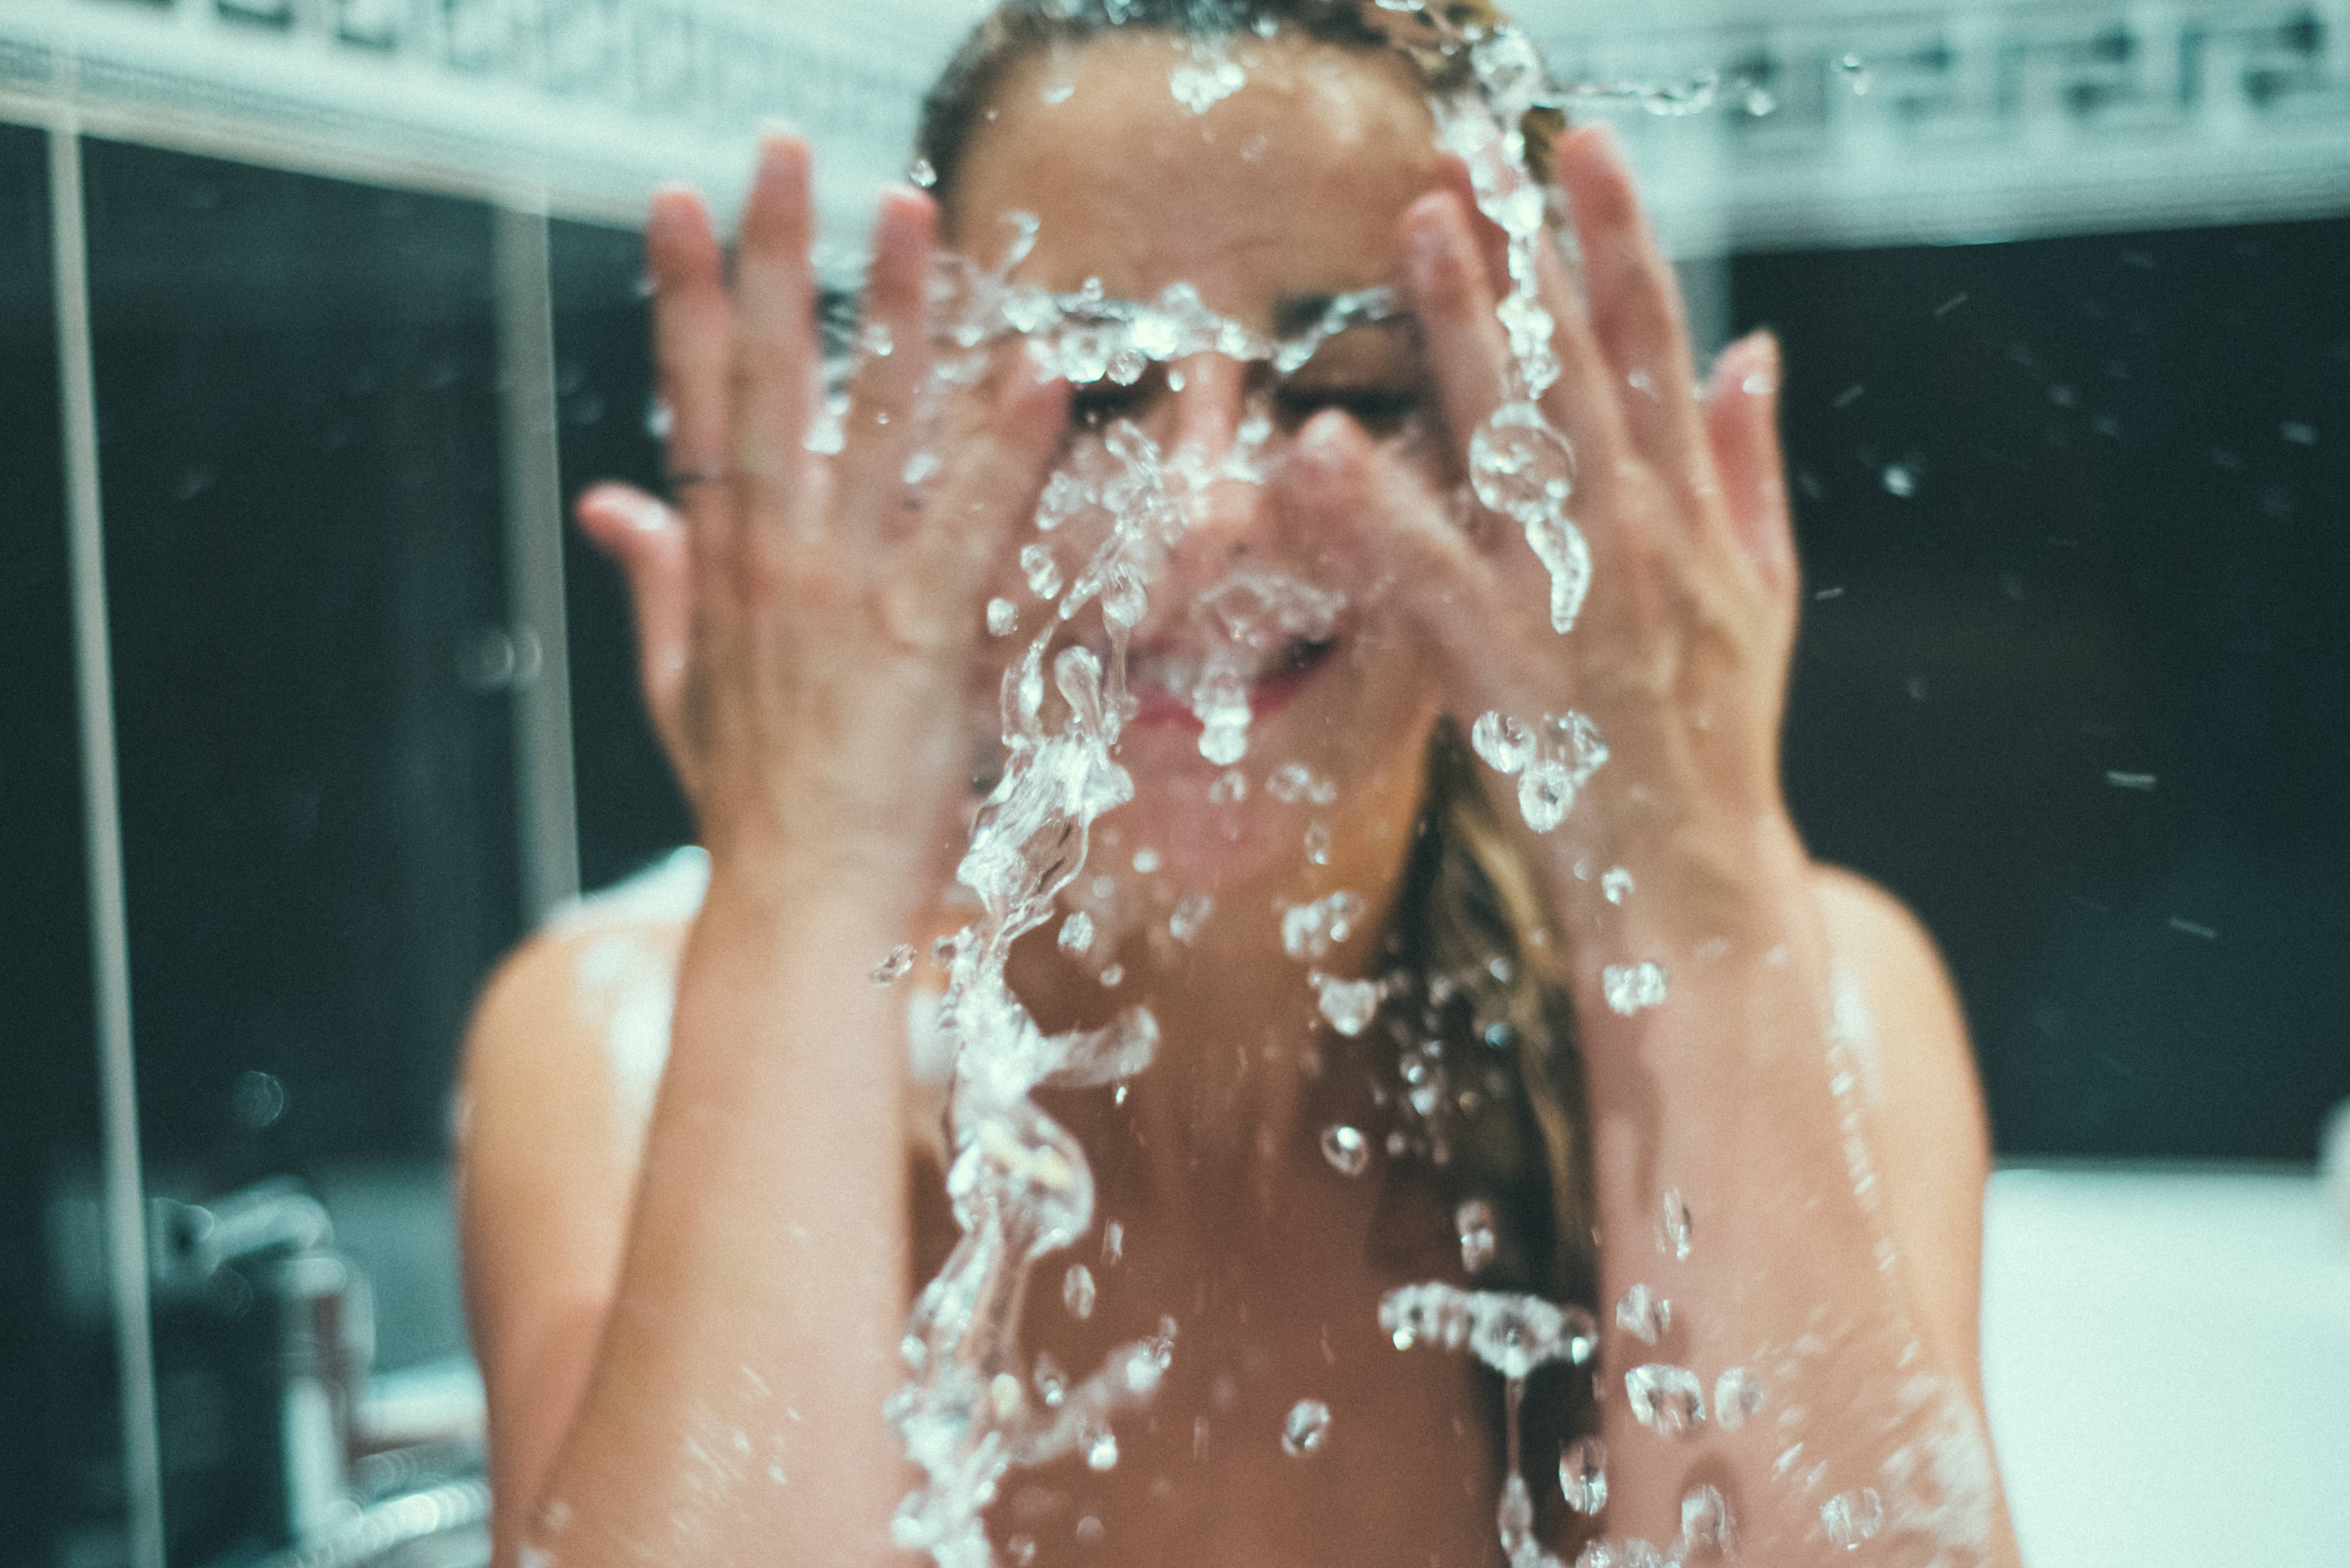 Science Suggests You Should Not Shower Every Day Anymore